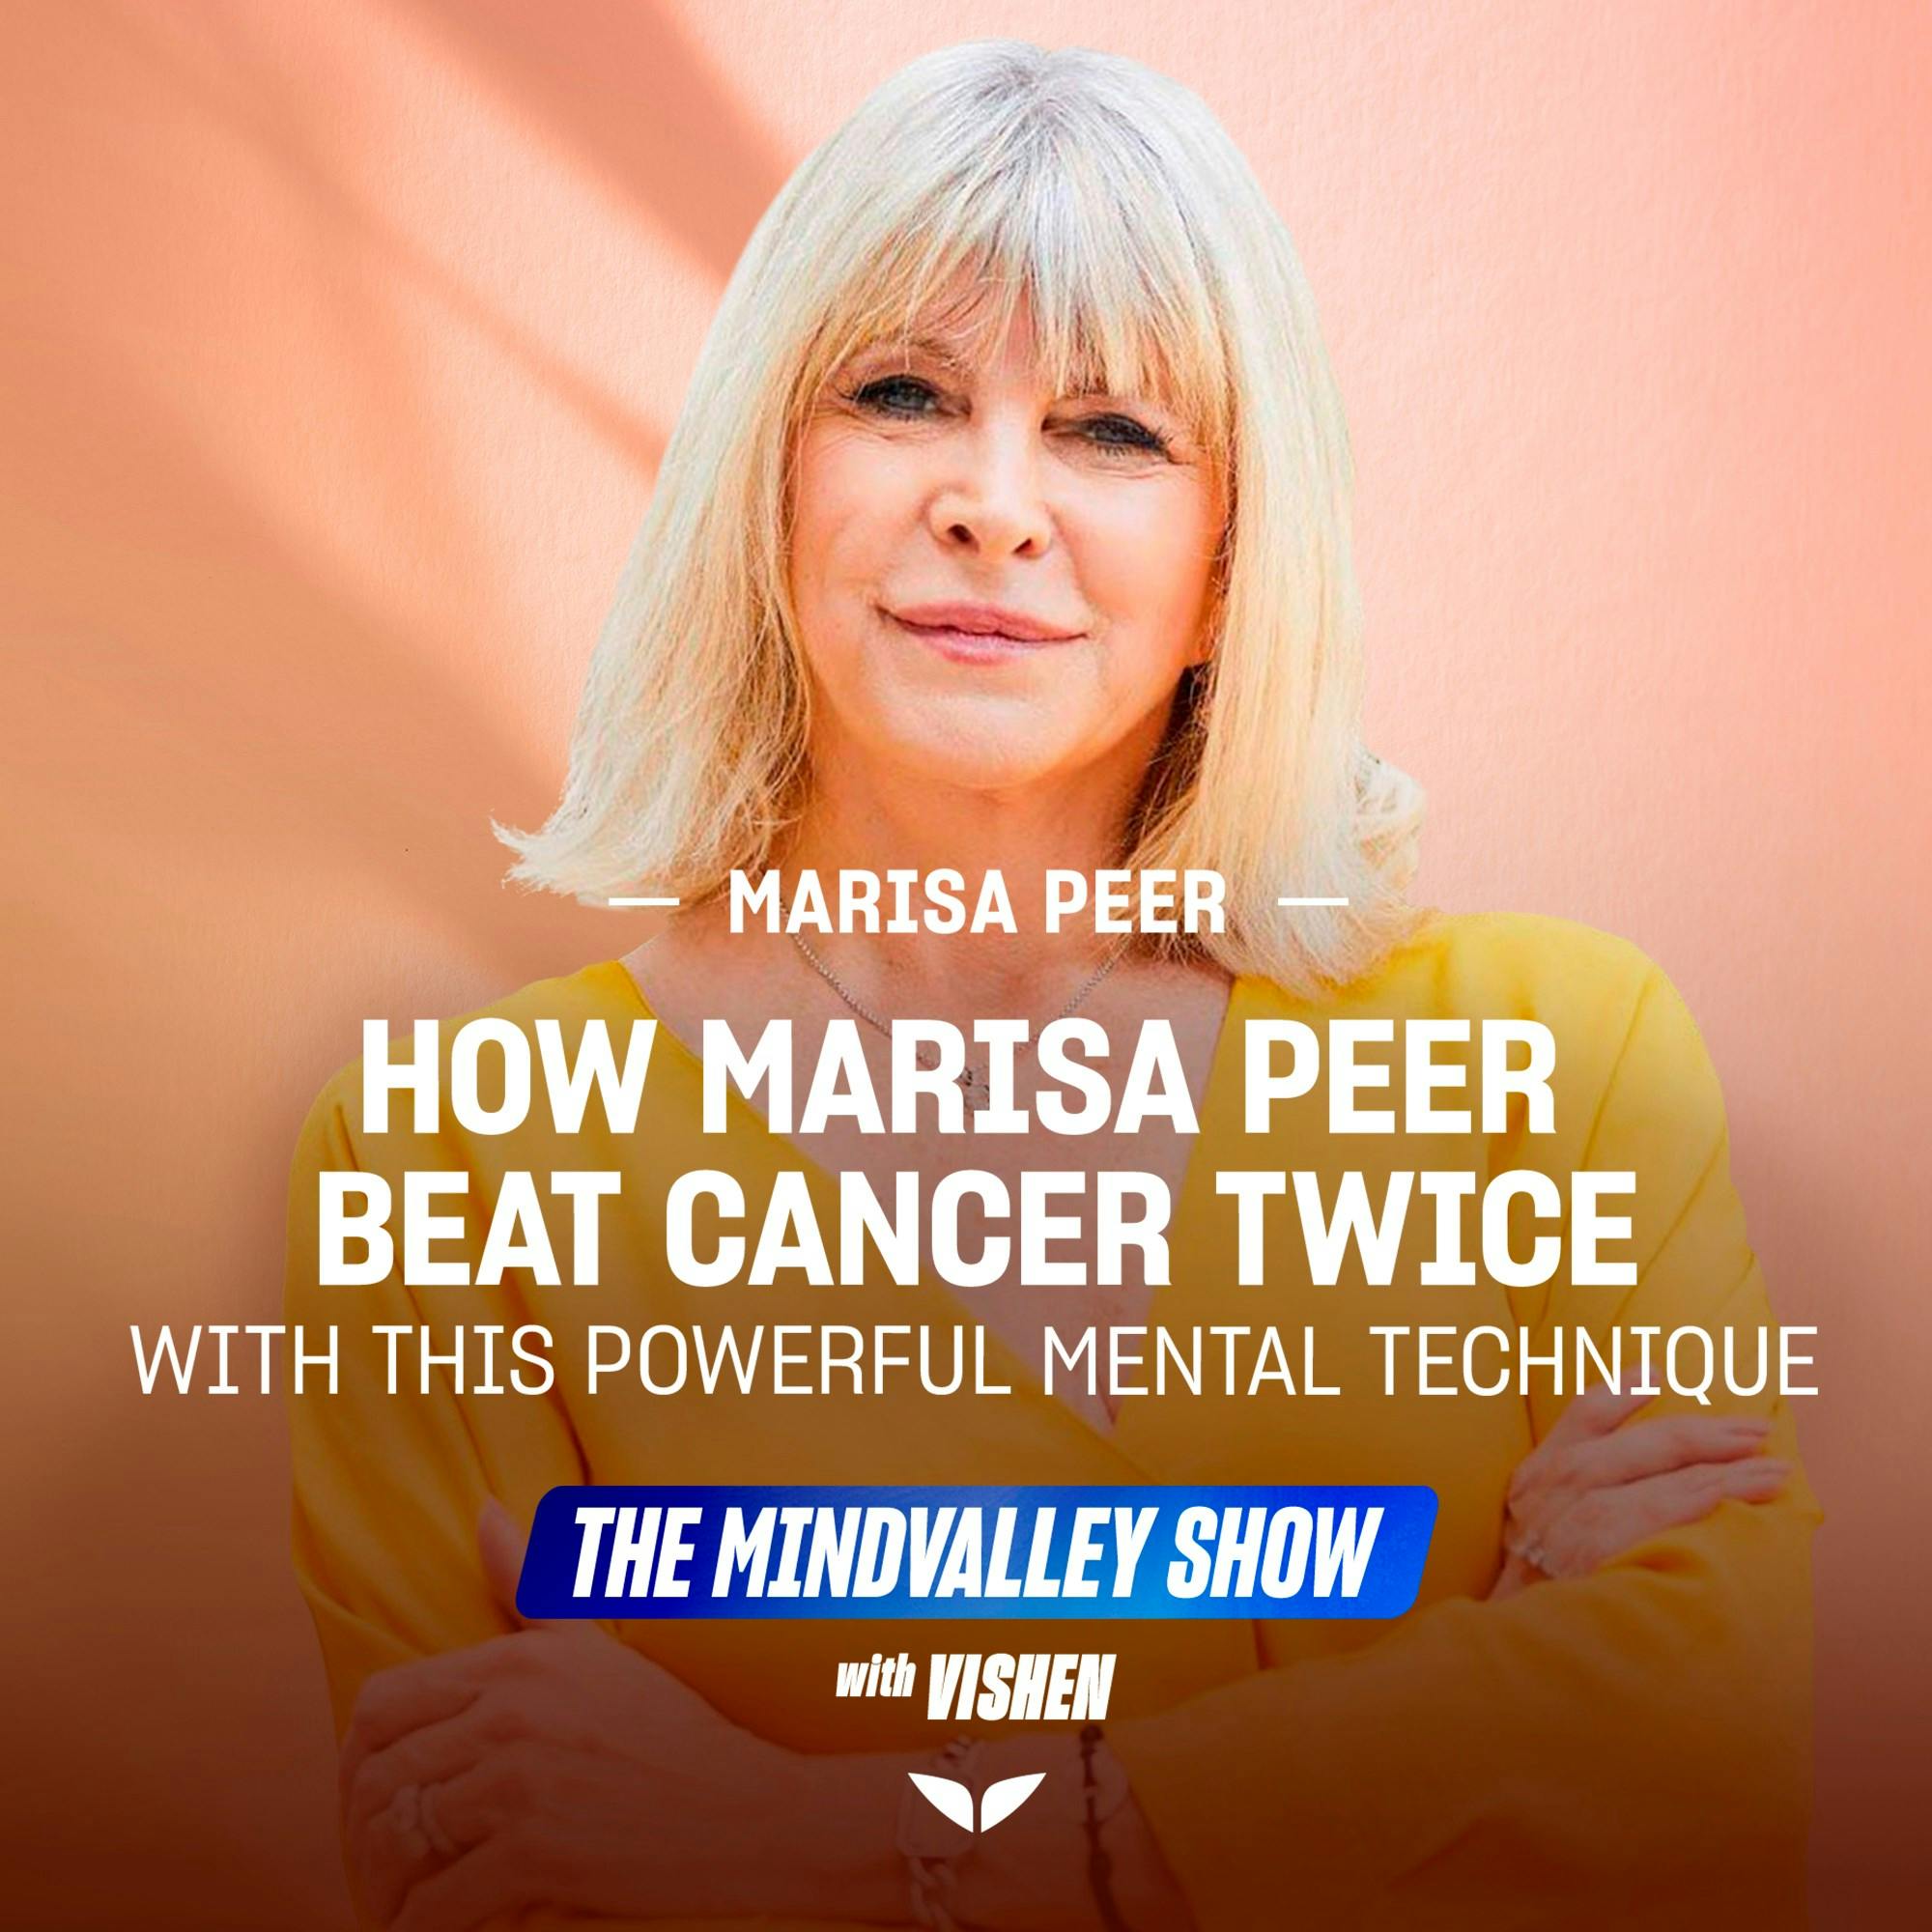 How Marisa Peer Beat Cancer Twice With This Powerful Mental Technique